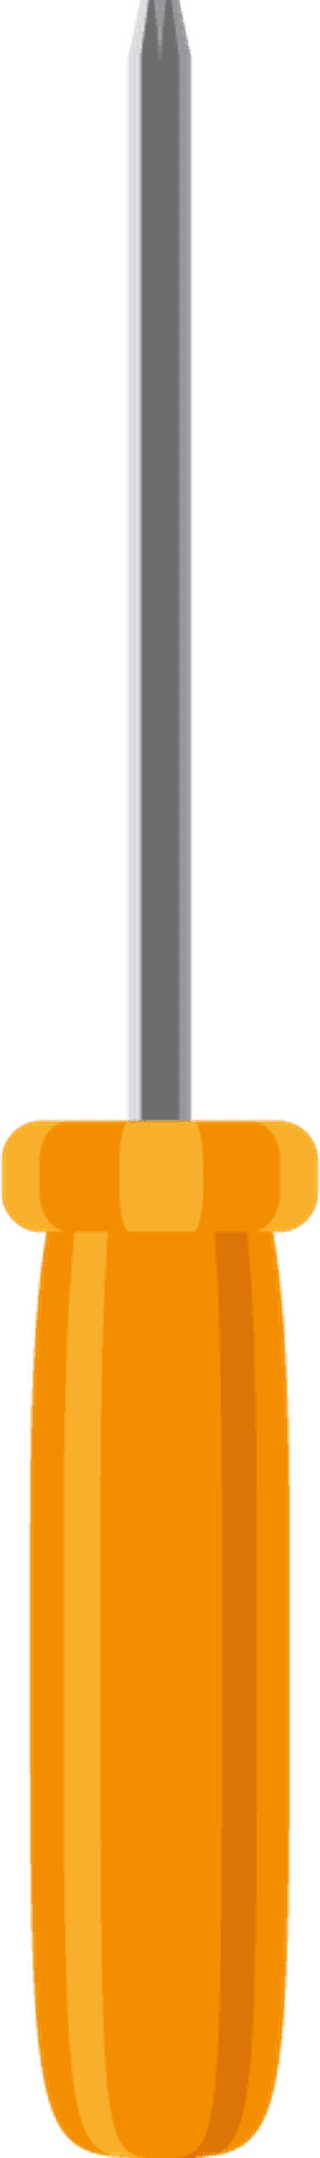 toolsicons-hammer-wrench-screwdriver-spanner-vector-illustration-534605